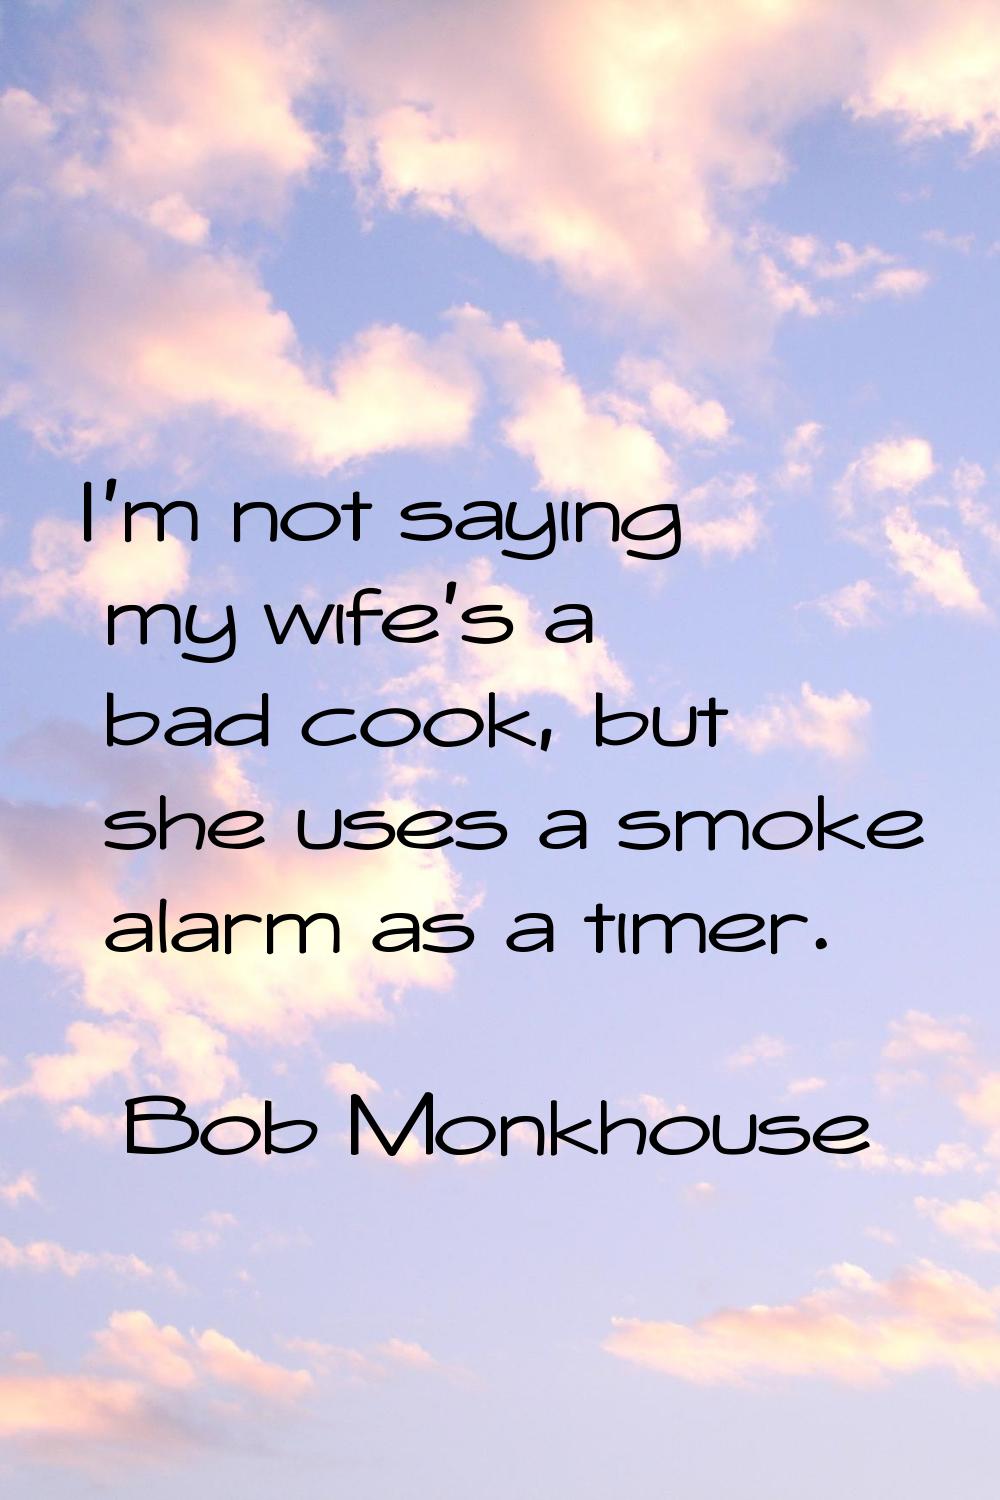 I'm not saying my wife's a bad cook, but she uses a smoke alarm as a timer.